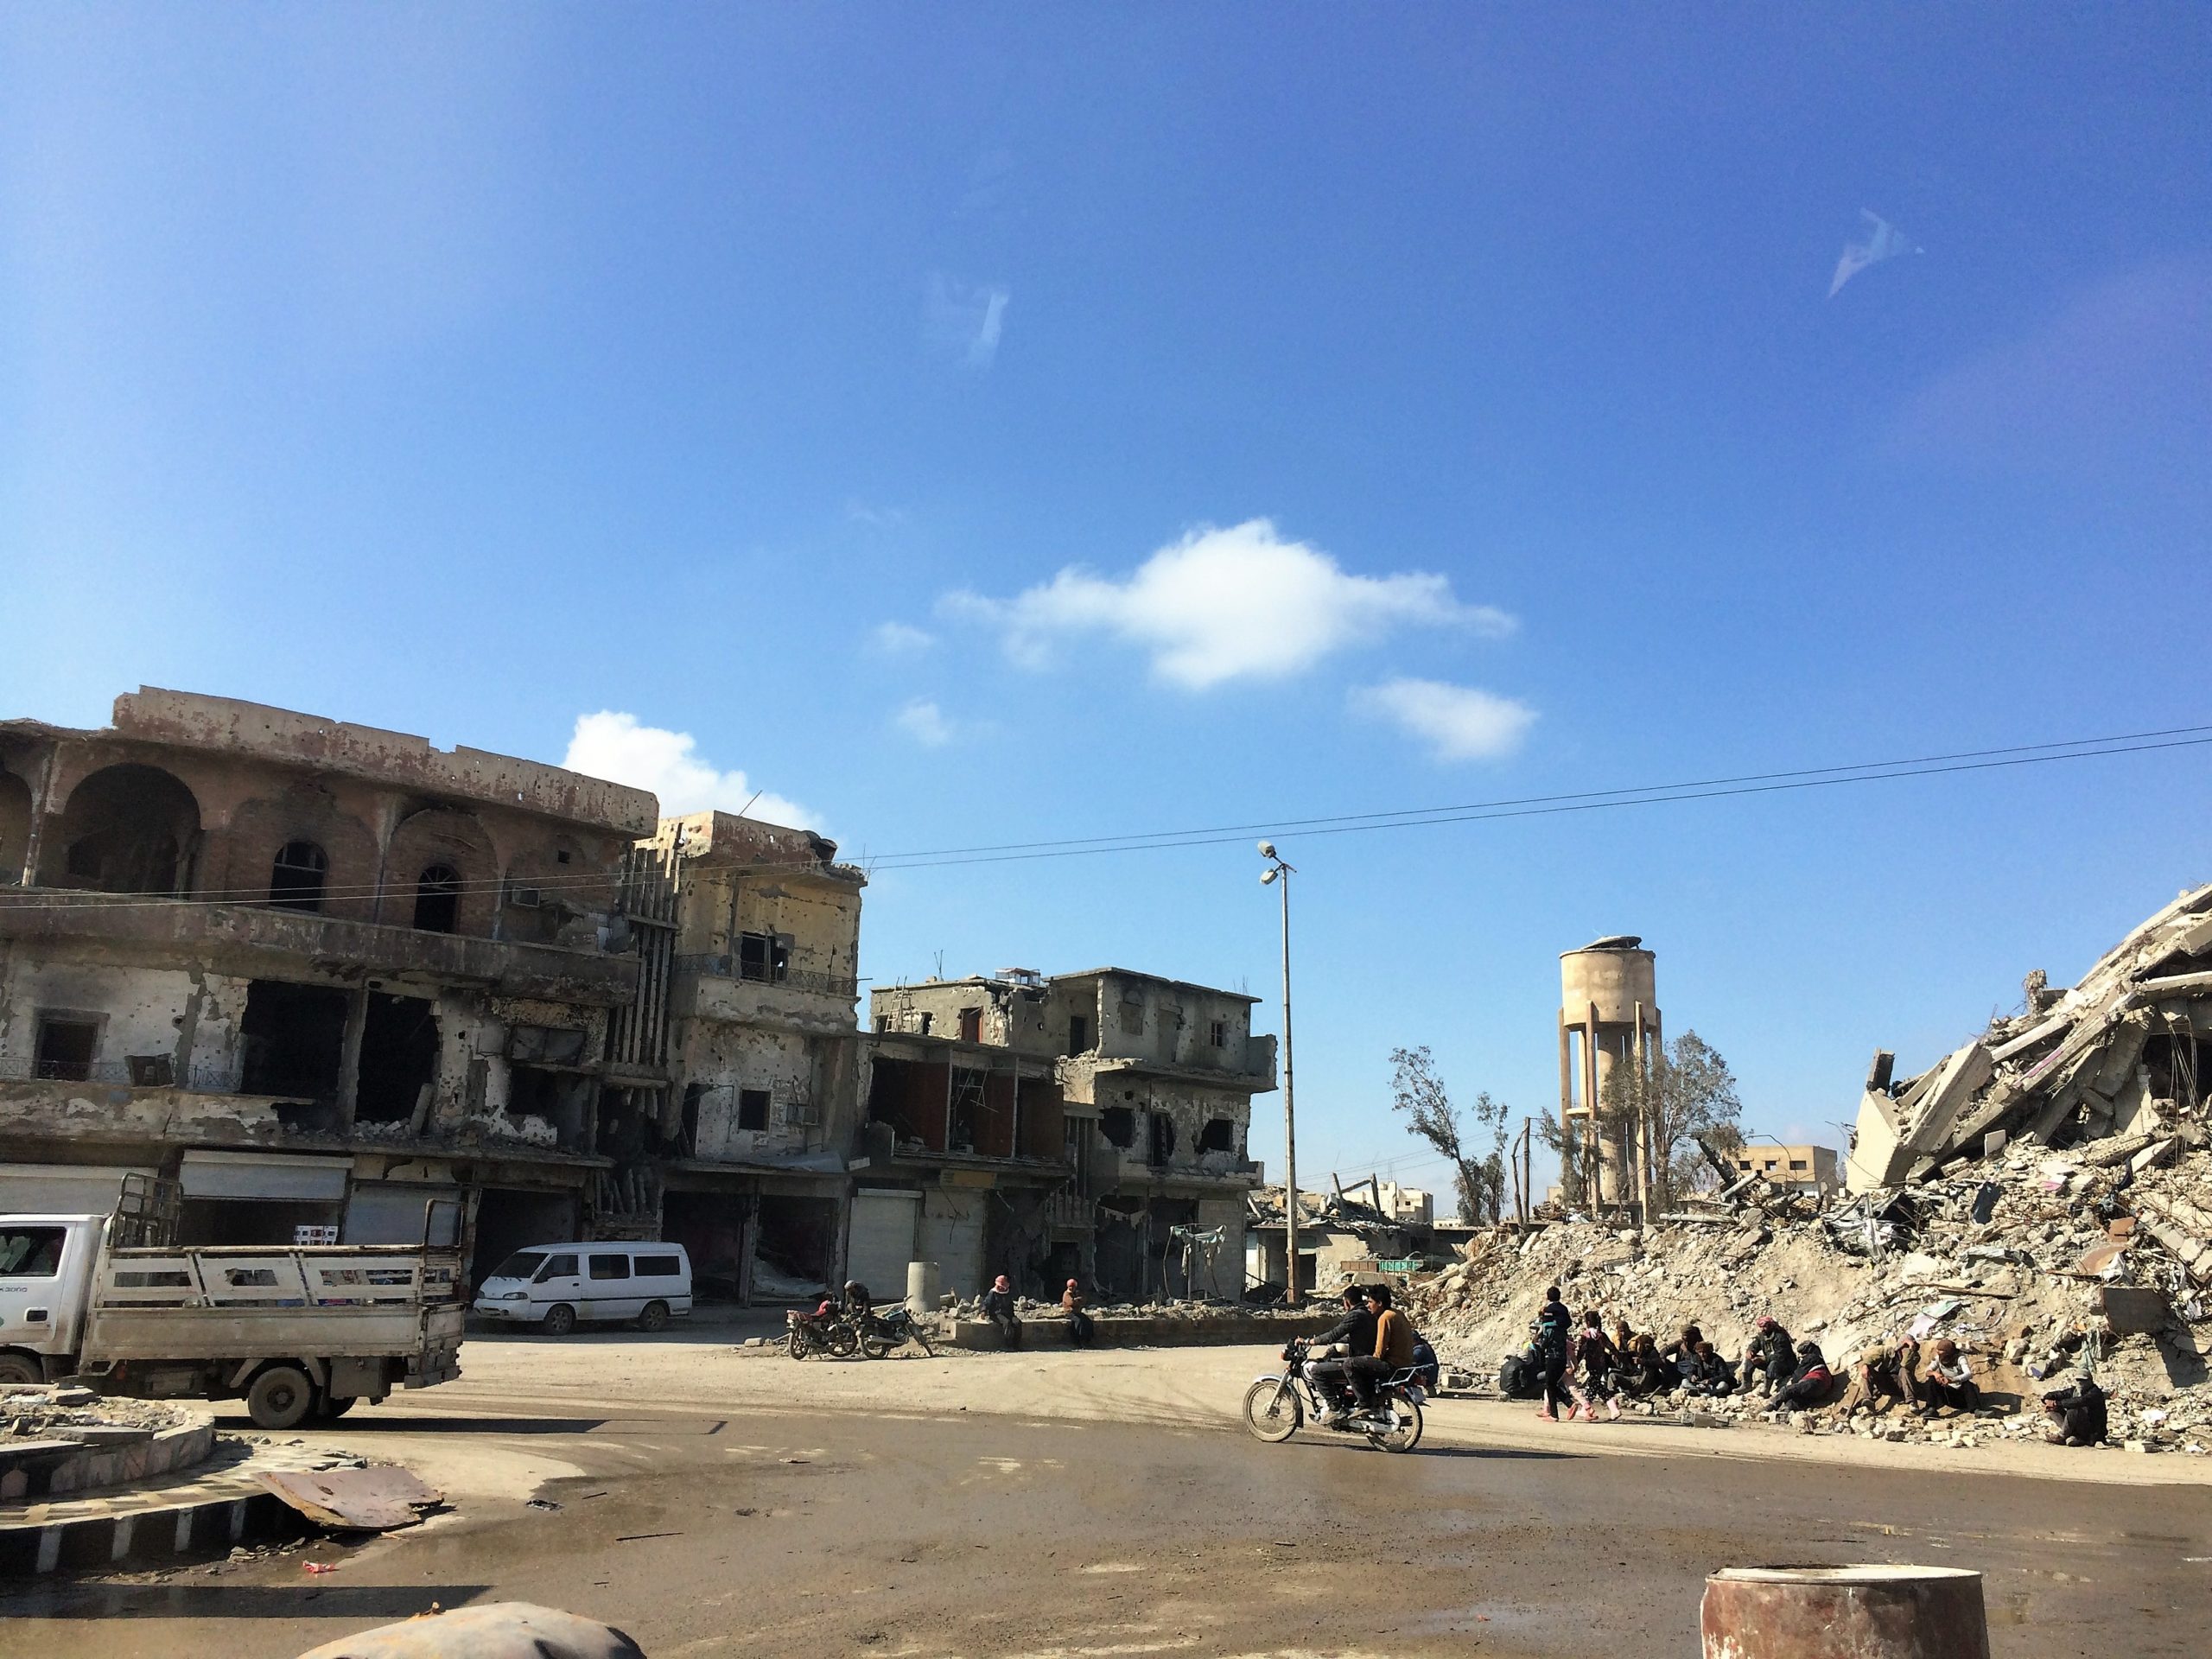 Access and movement has improved in most areas of Ar-Raqqa. ©REACH/2018